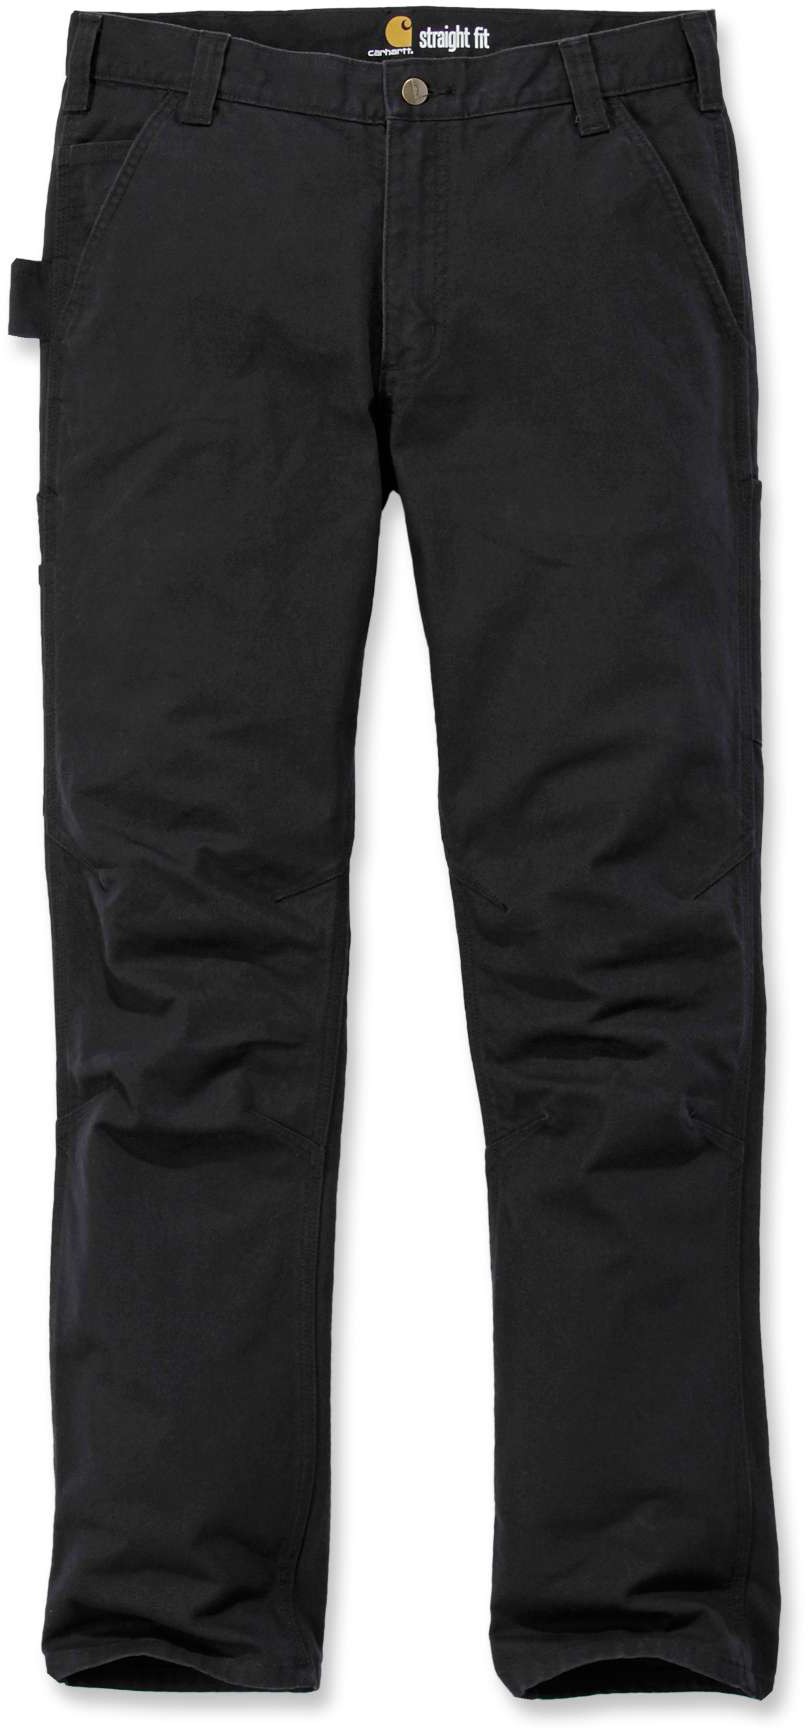 Men's straight fit stretch Duck dungaree pants - 103339 - CARHARTT